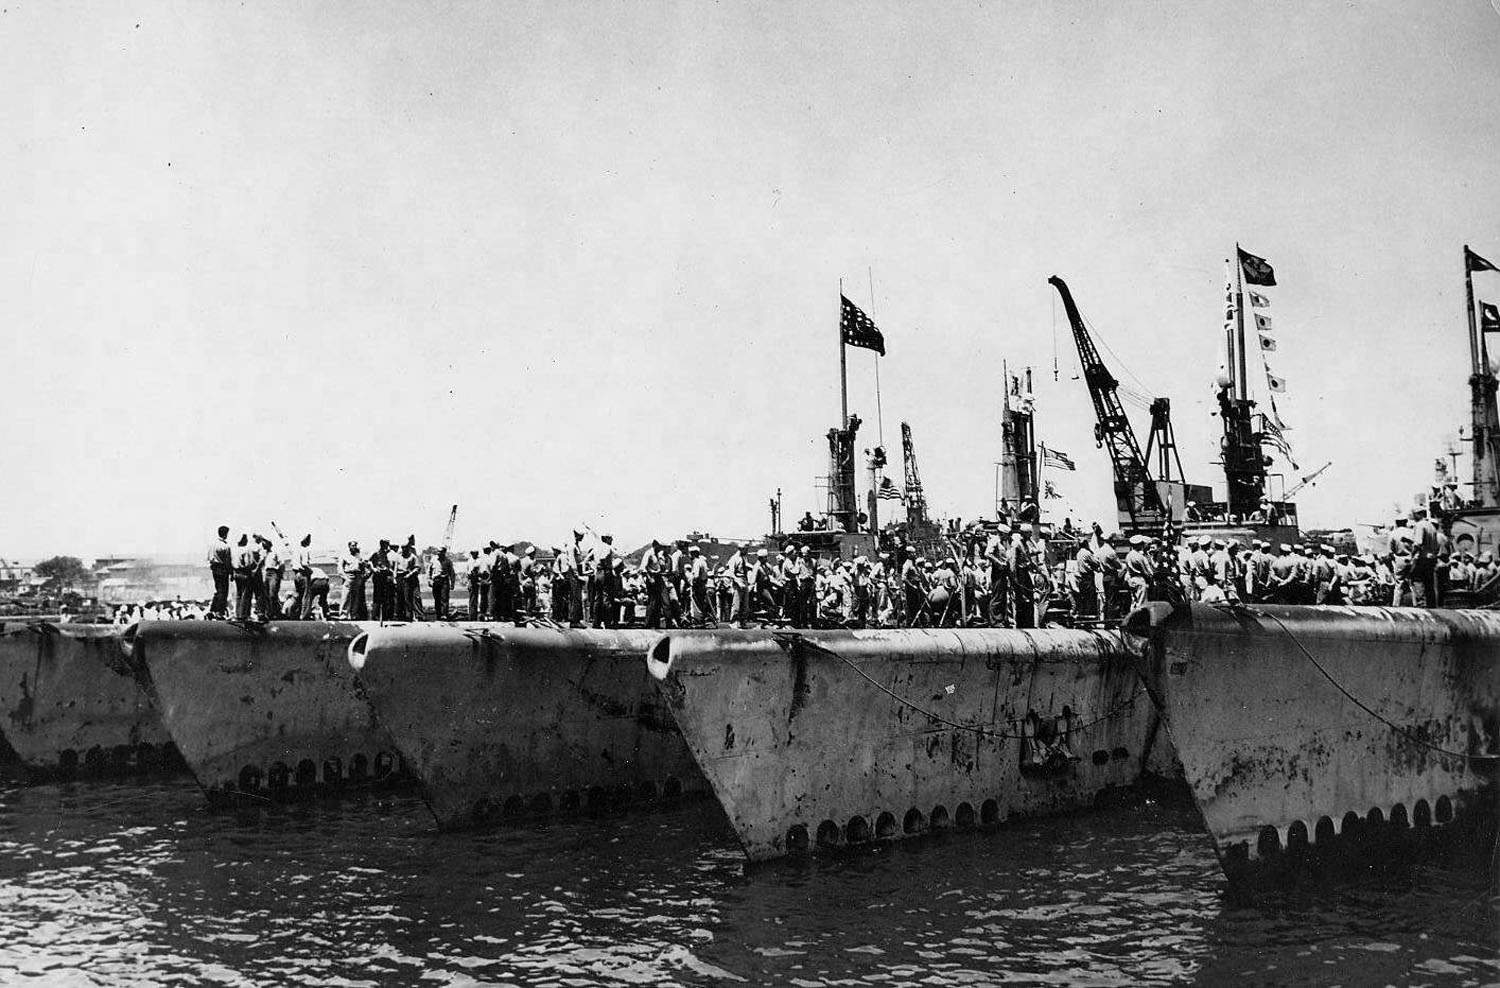 Five of Hydeman's Hellcats upon their return from Operation Barney: USS Flying Fish, USS Spadefish, USS Tinosa, USS Bowfin, and USS Skate, Pearl Harbor, US Territory of Hawaii, 4 Jul 1945